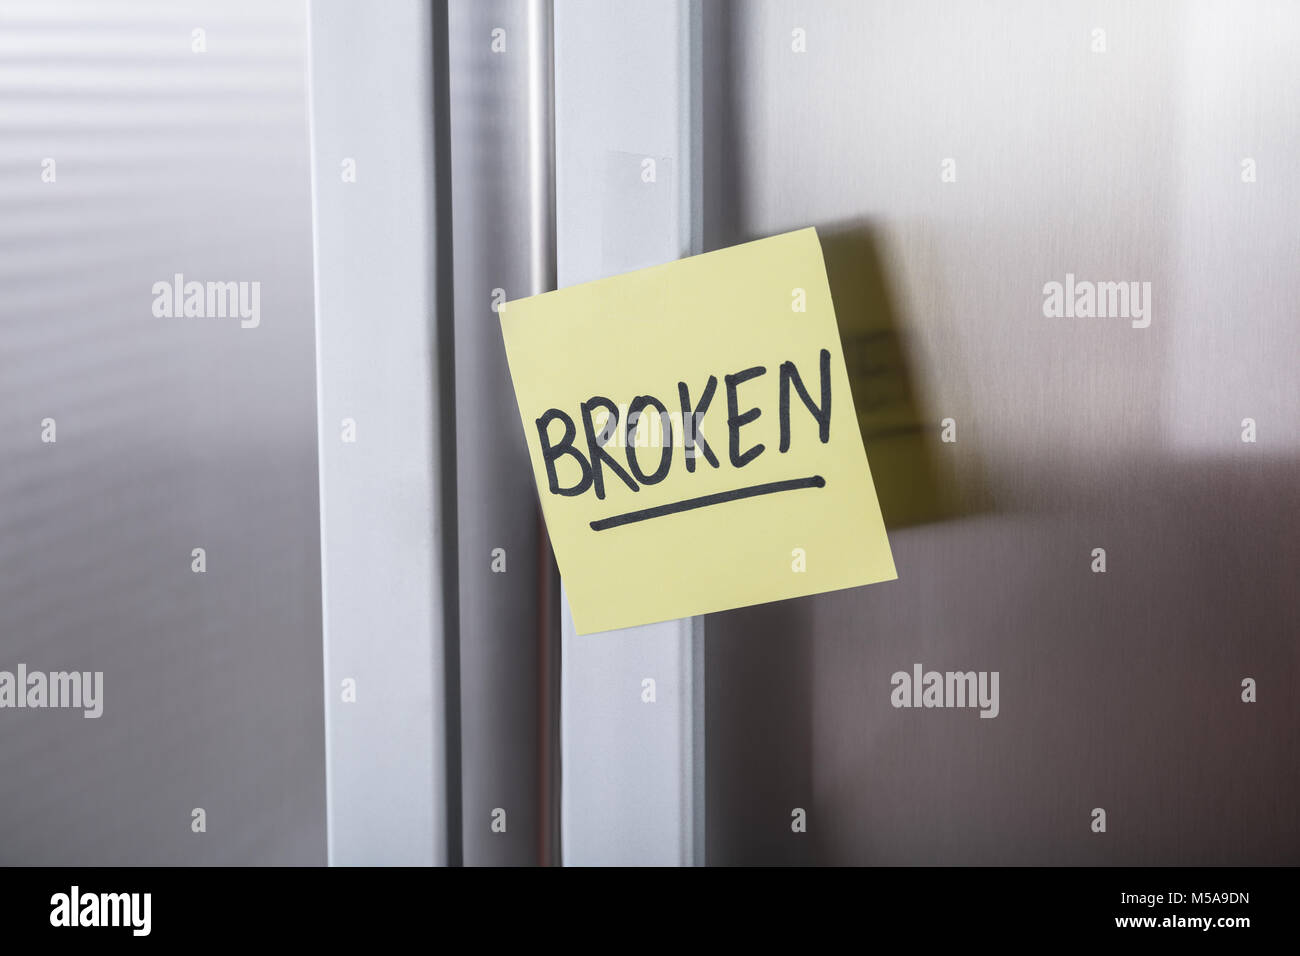 Close-up Of A Steel Refrigerator With Adhesive Notes Showing Broken Text Stock Photo